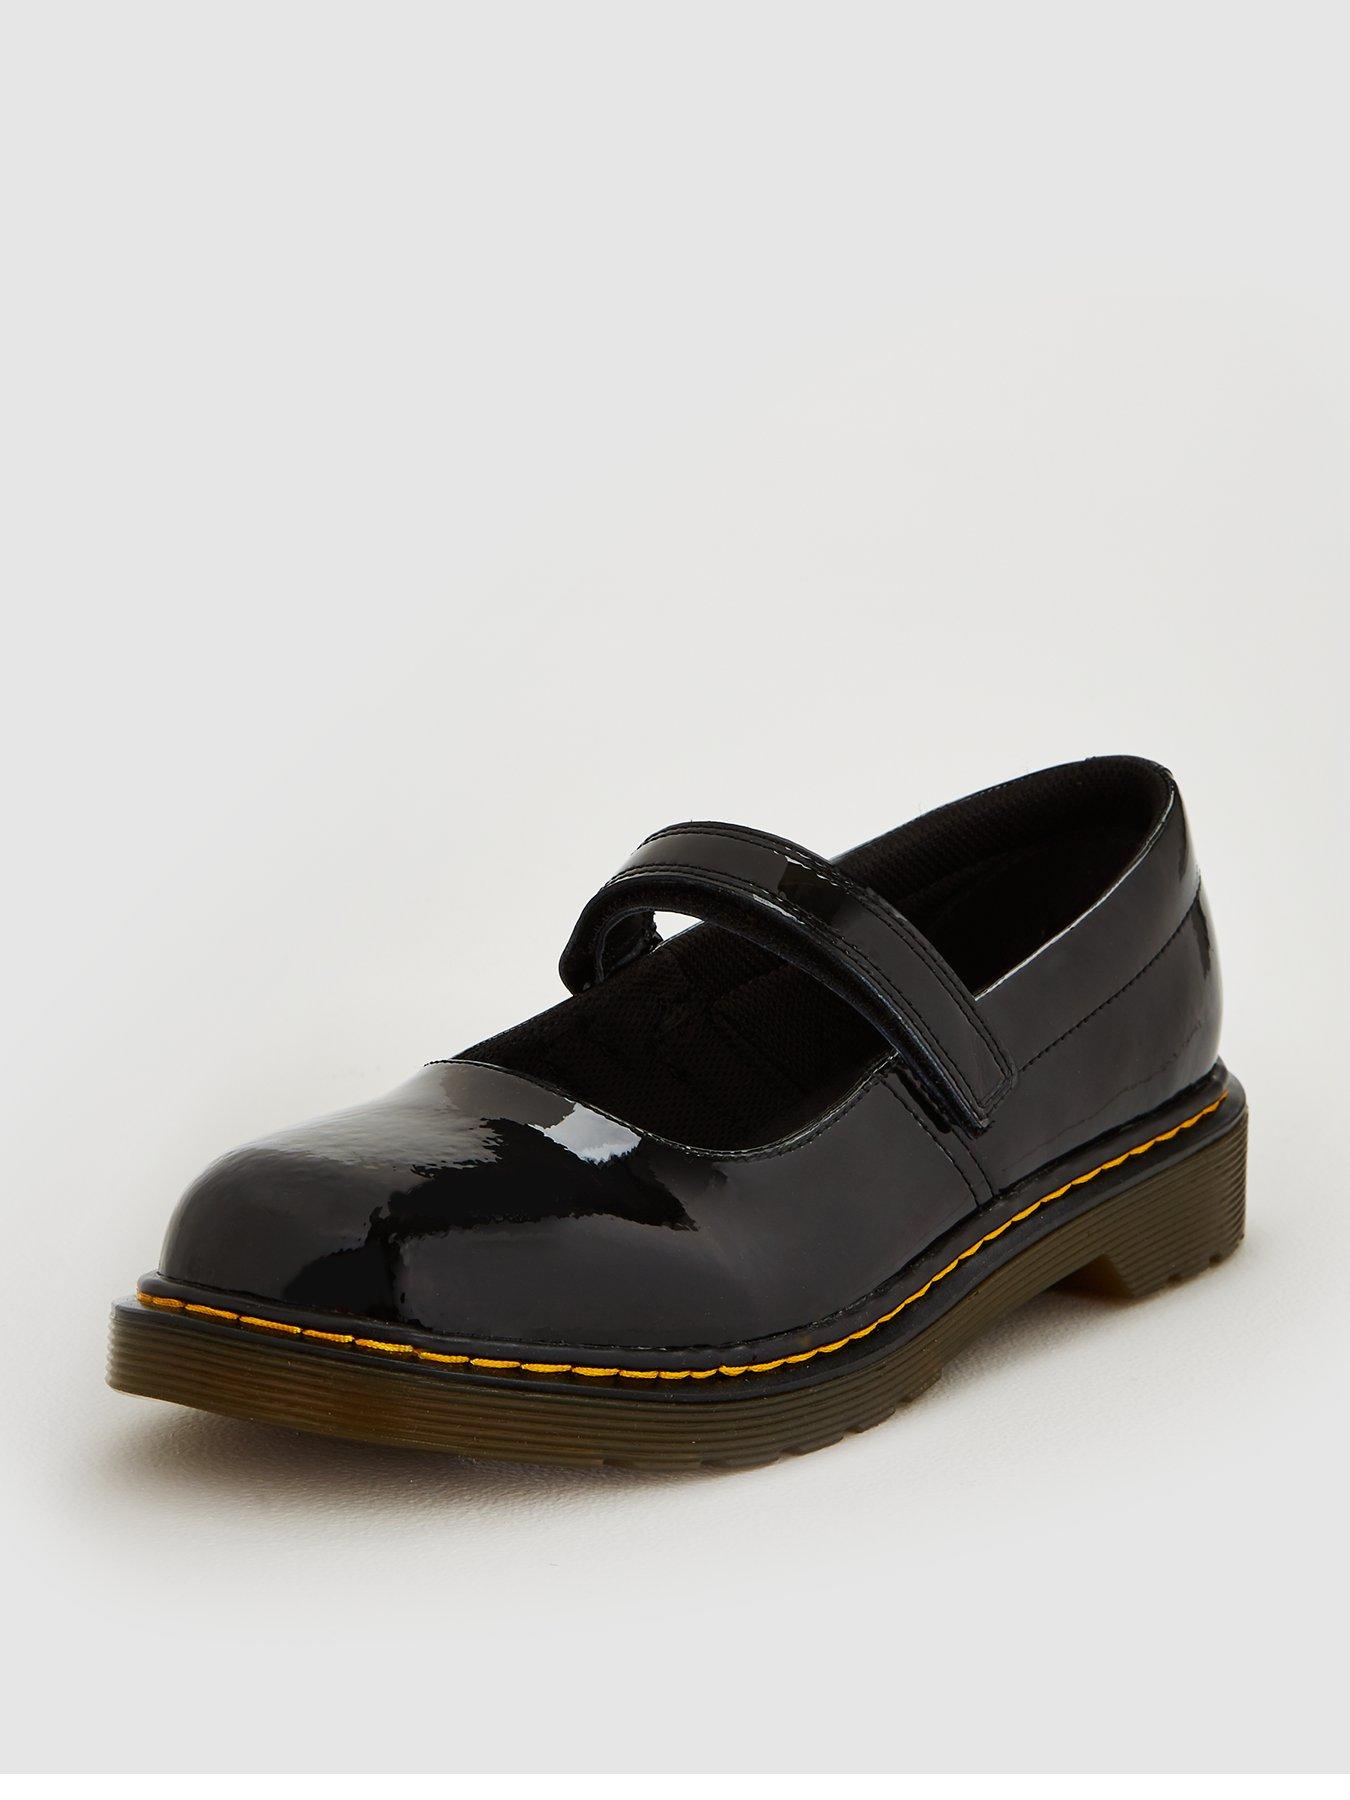 dr martens school shoes with bow